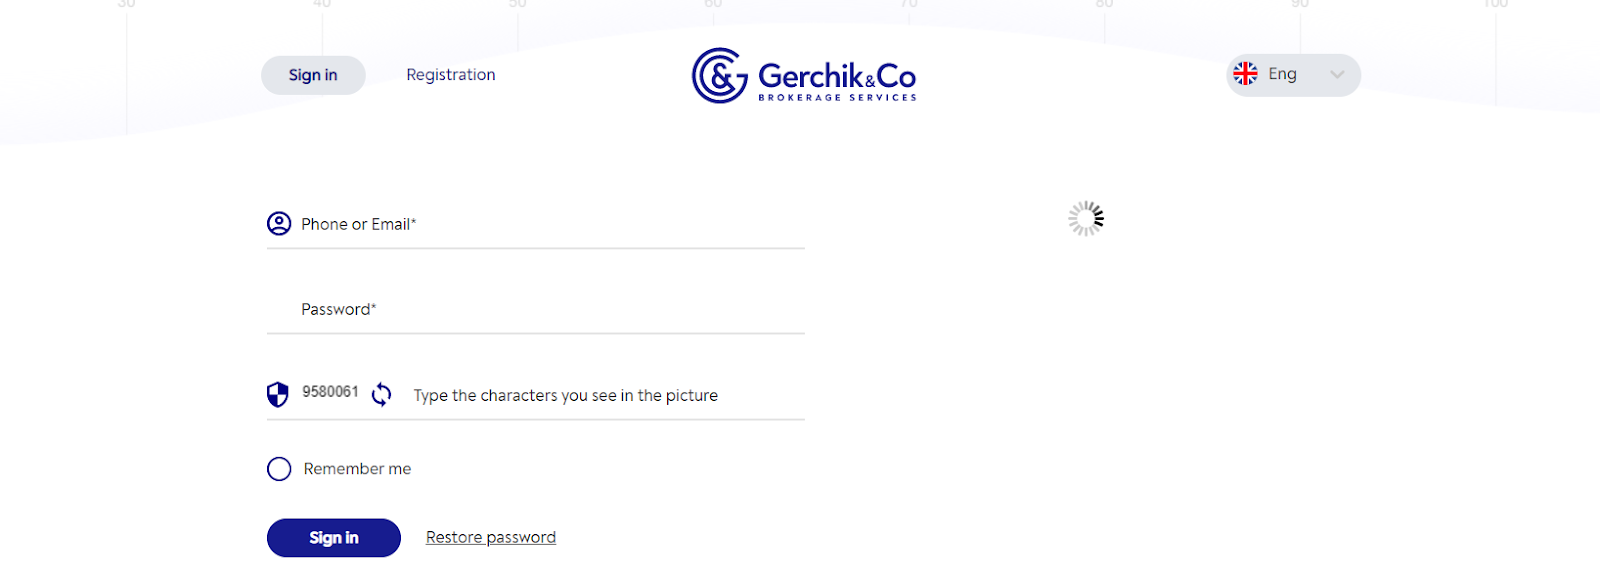 Overview of Gerchik&Co’ User Account — Log in and Verification